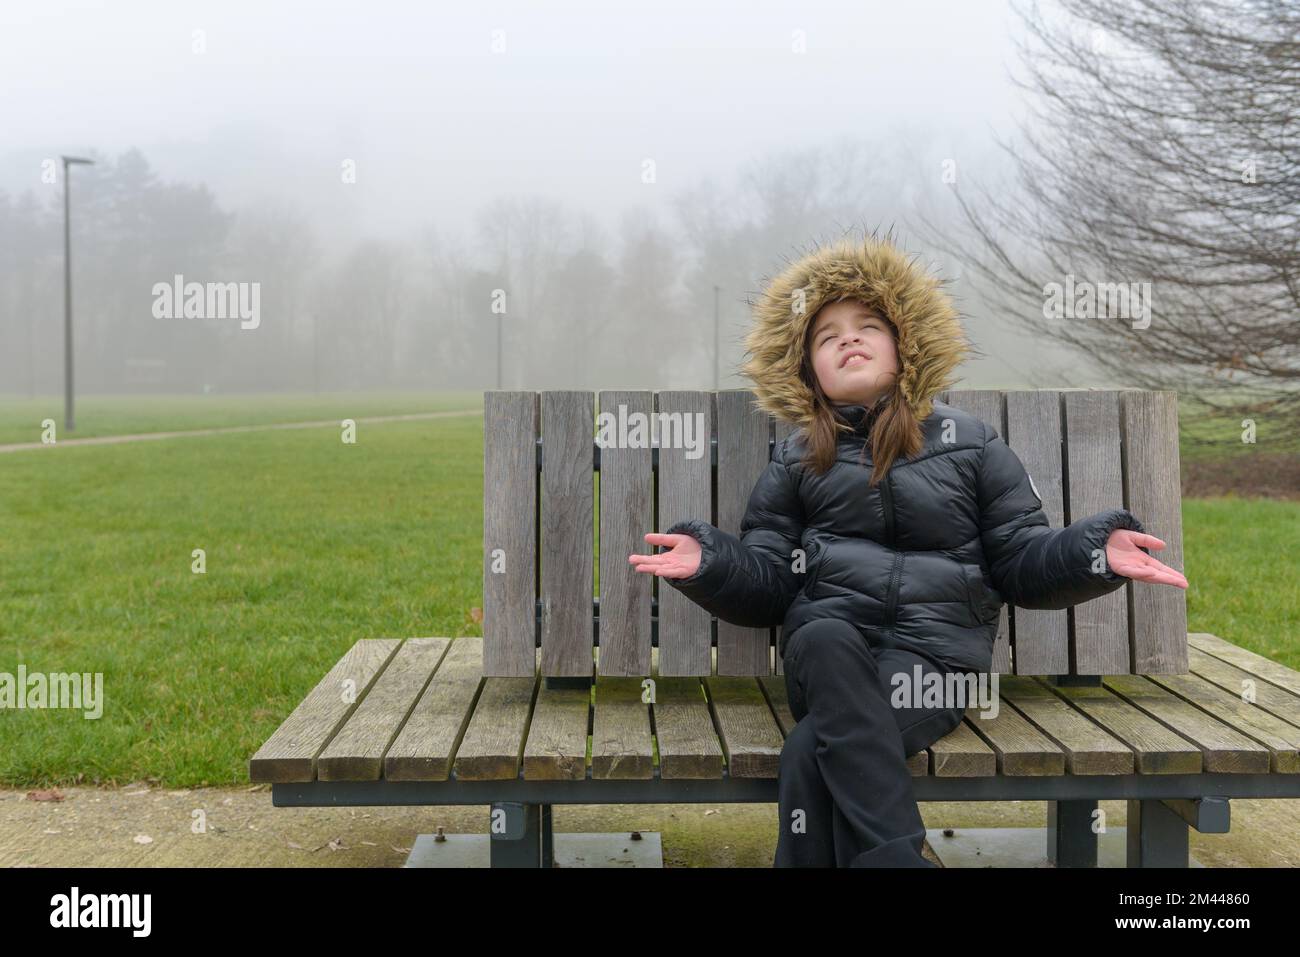 Enjoying a winter walk in the park. Teenage girl on a bench in cold weather in a warm jacket Stock Photo